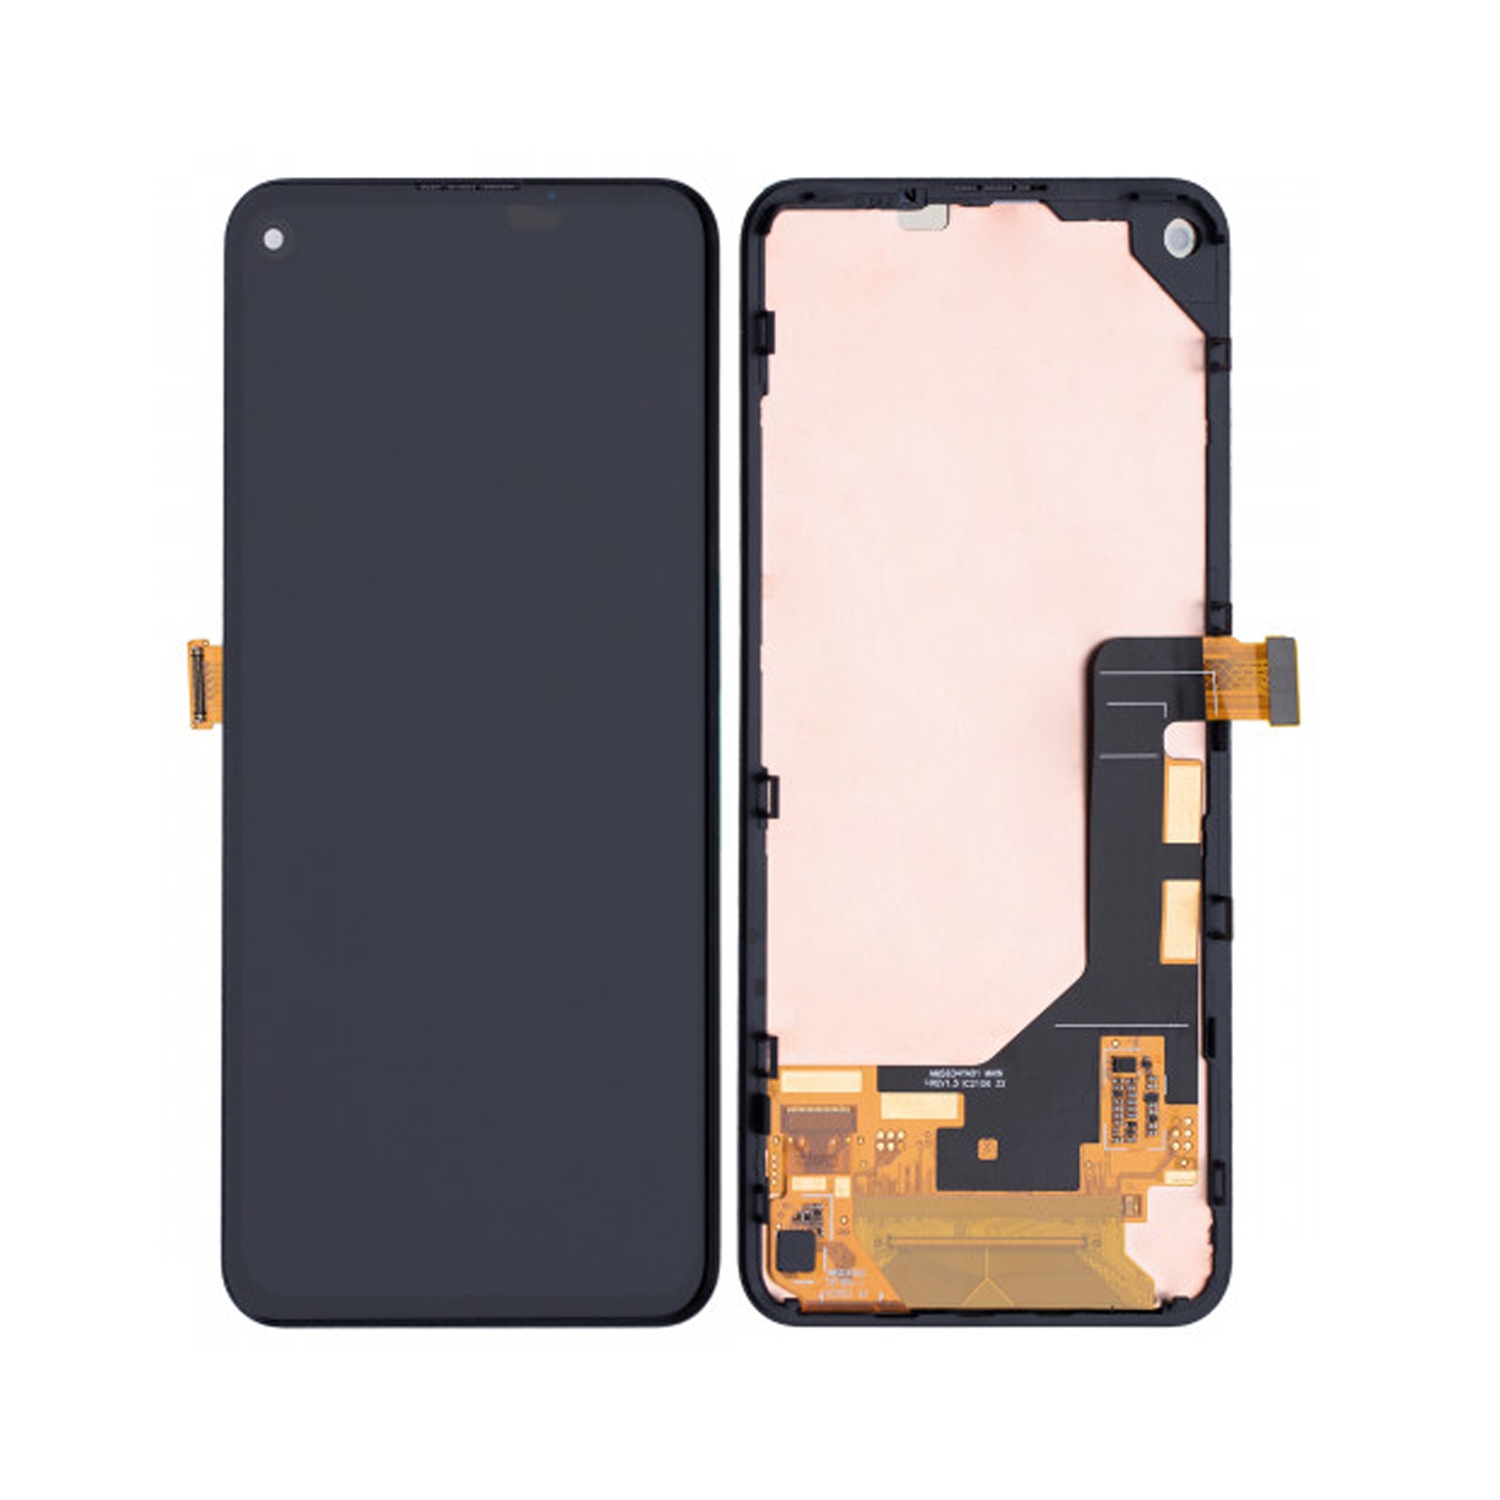 Refurbished (Excellent) - Replacement OLED Display Touch Screen Digitizer Assembly With Frame For Google Pixel 5a 5G - Black